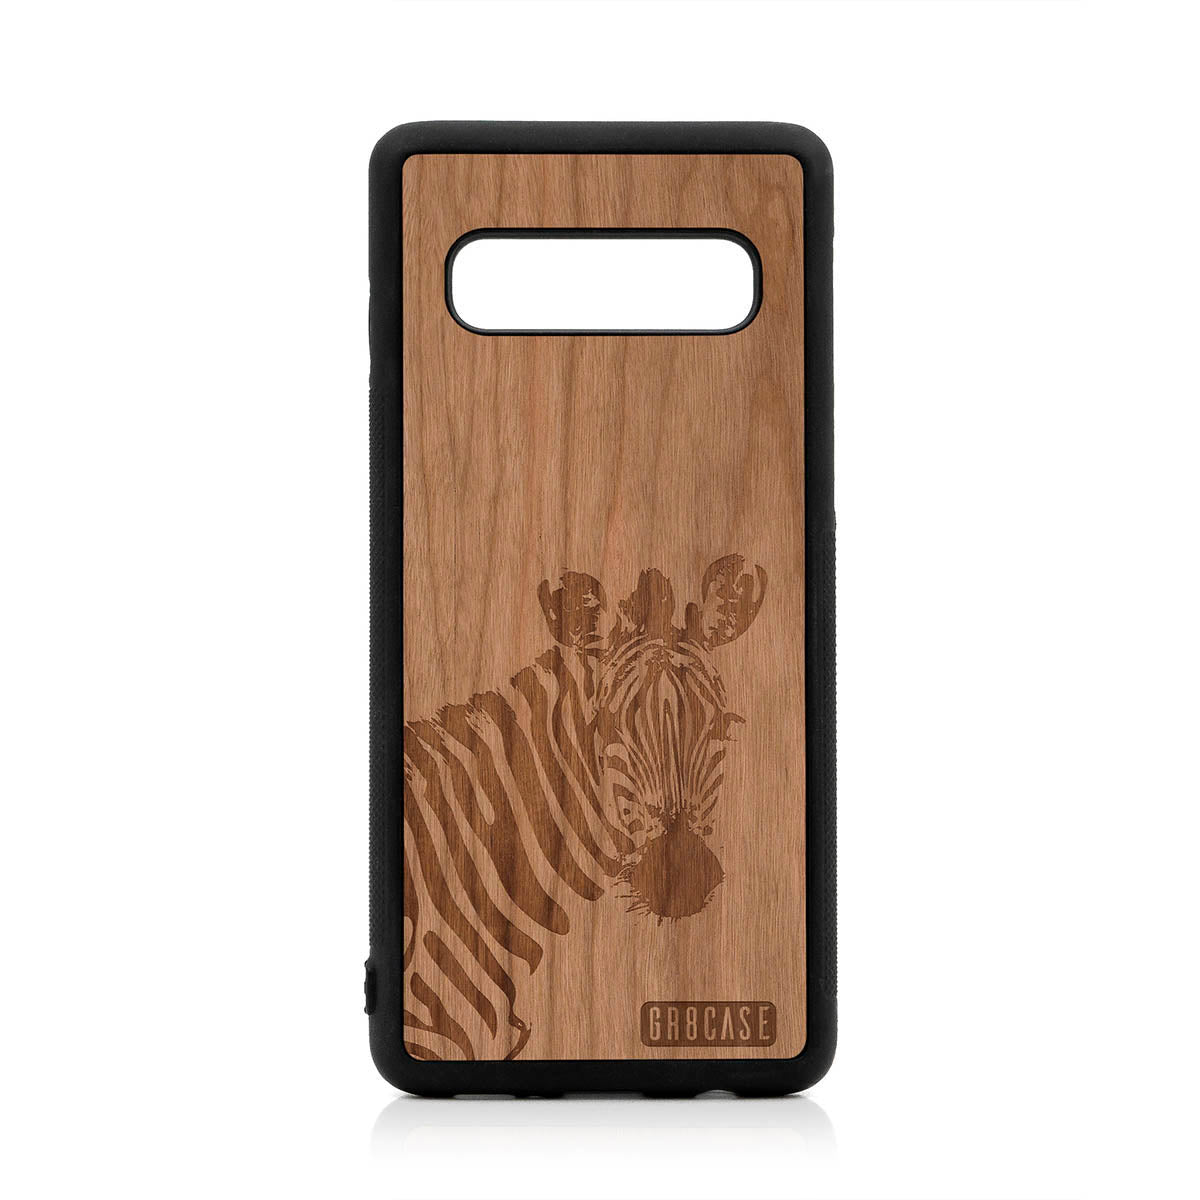 Lookout Zebra Design Wood Case For Samsung Galaxy S10